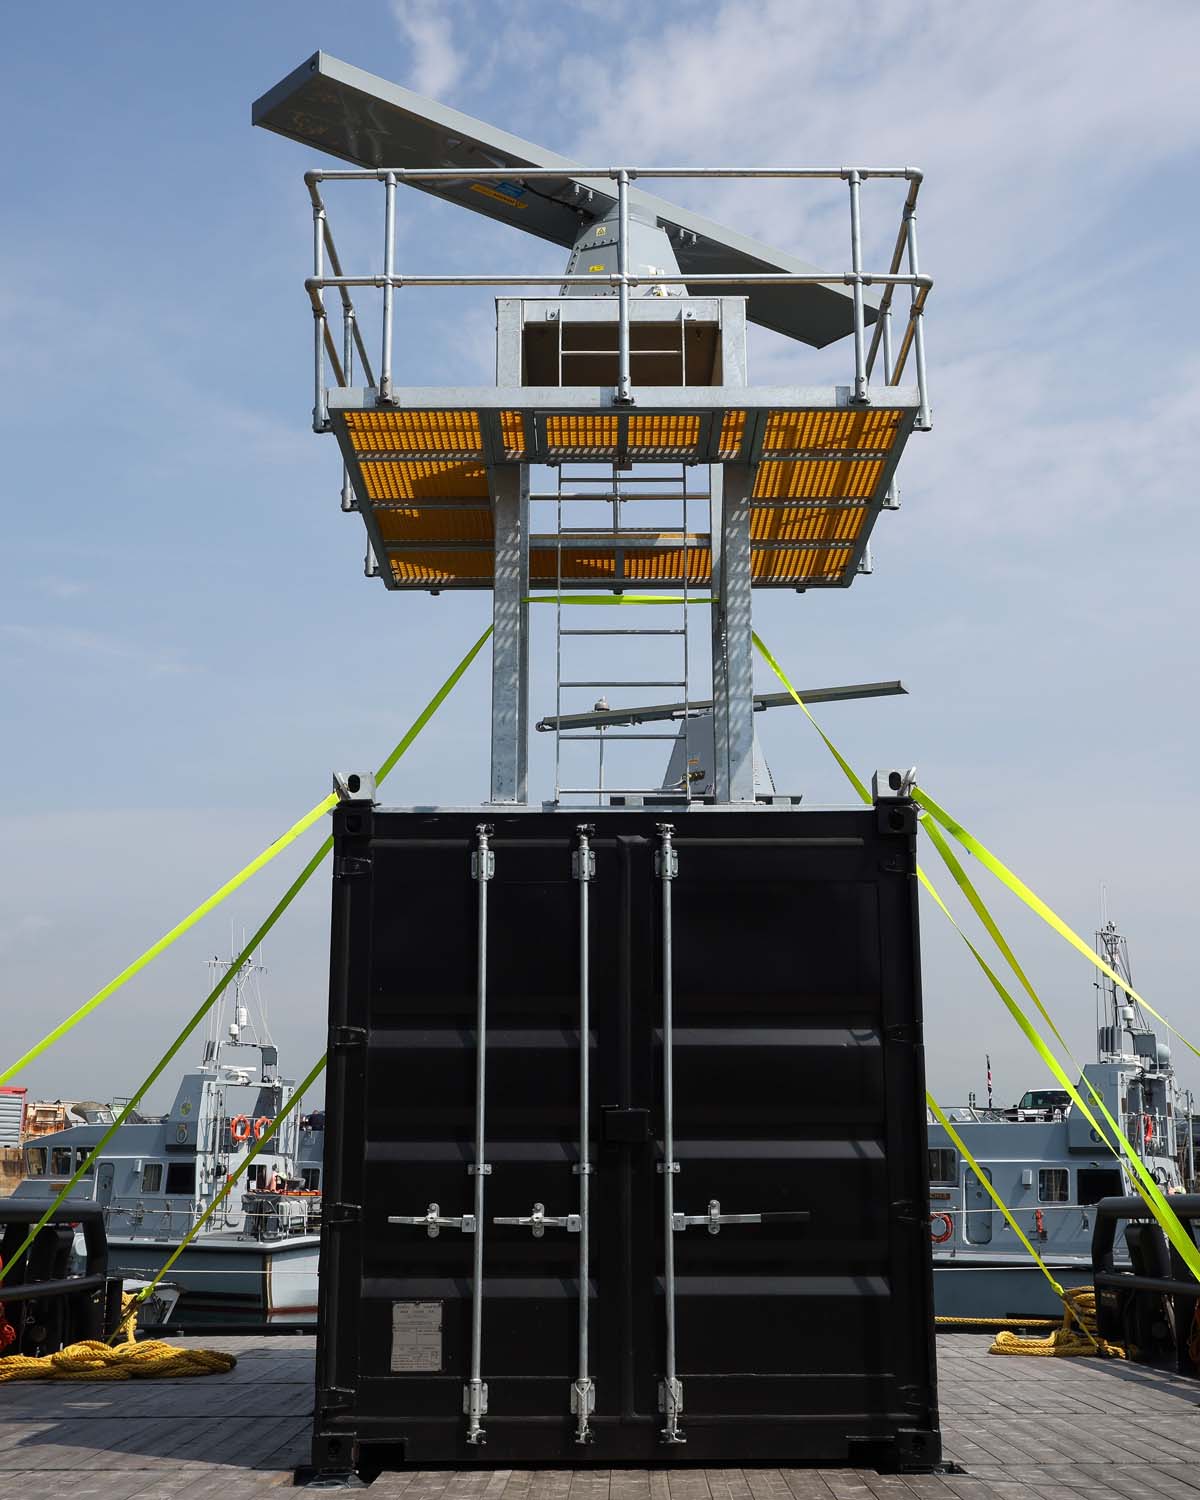  The navigation radars have been put through their paces by the NavyX ship off the south coast – utilising the ship’s ability to test the performance and success of new kit and equipment.  